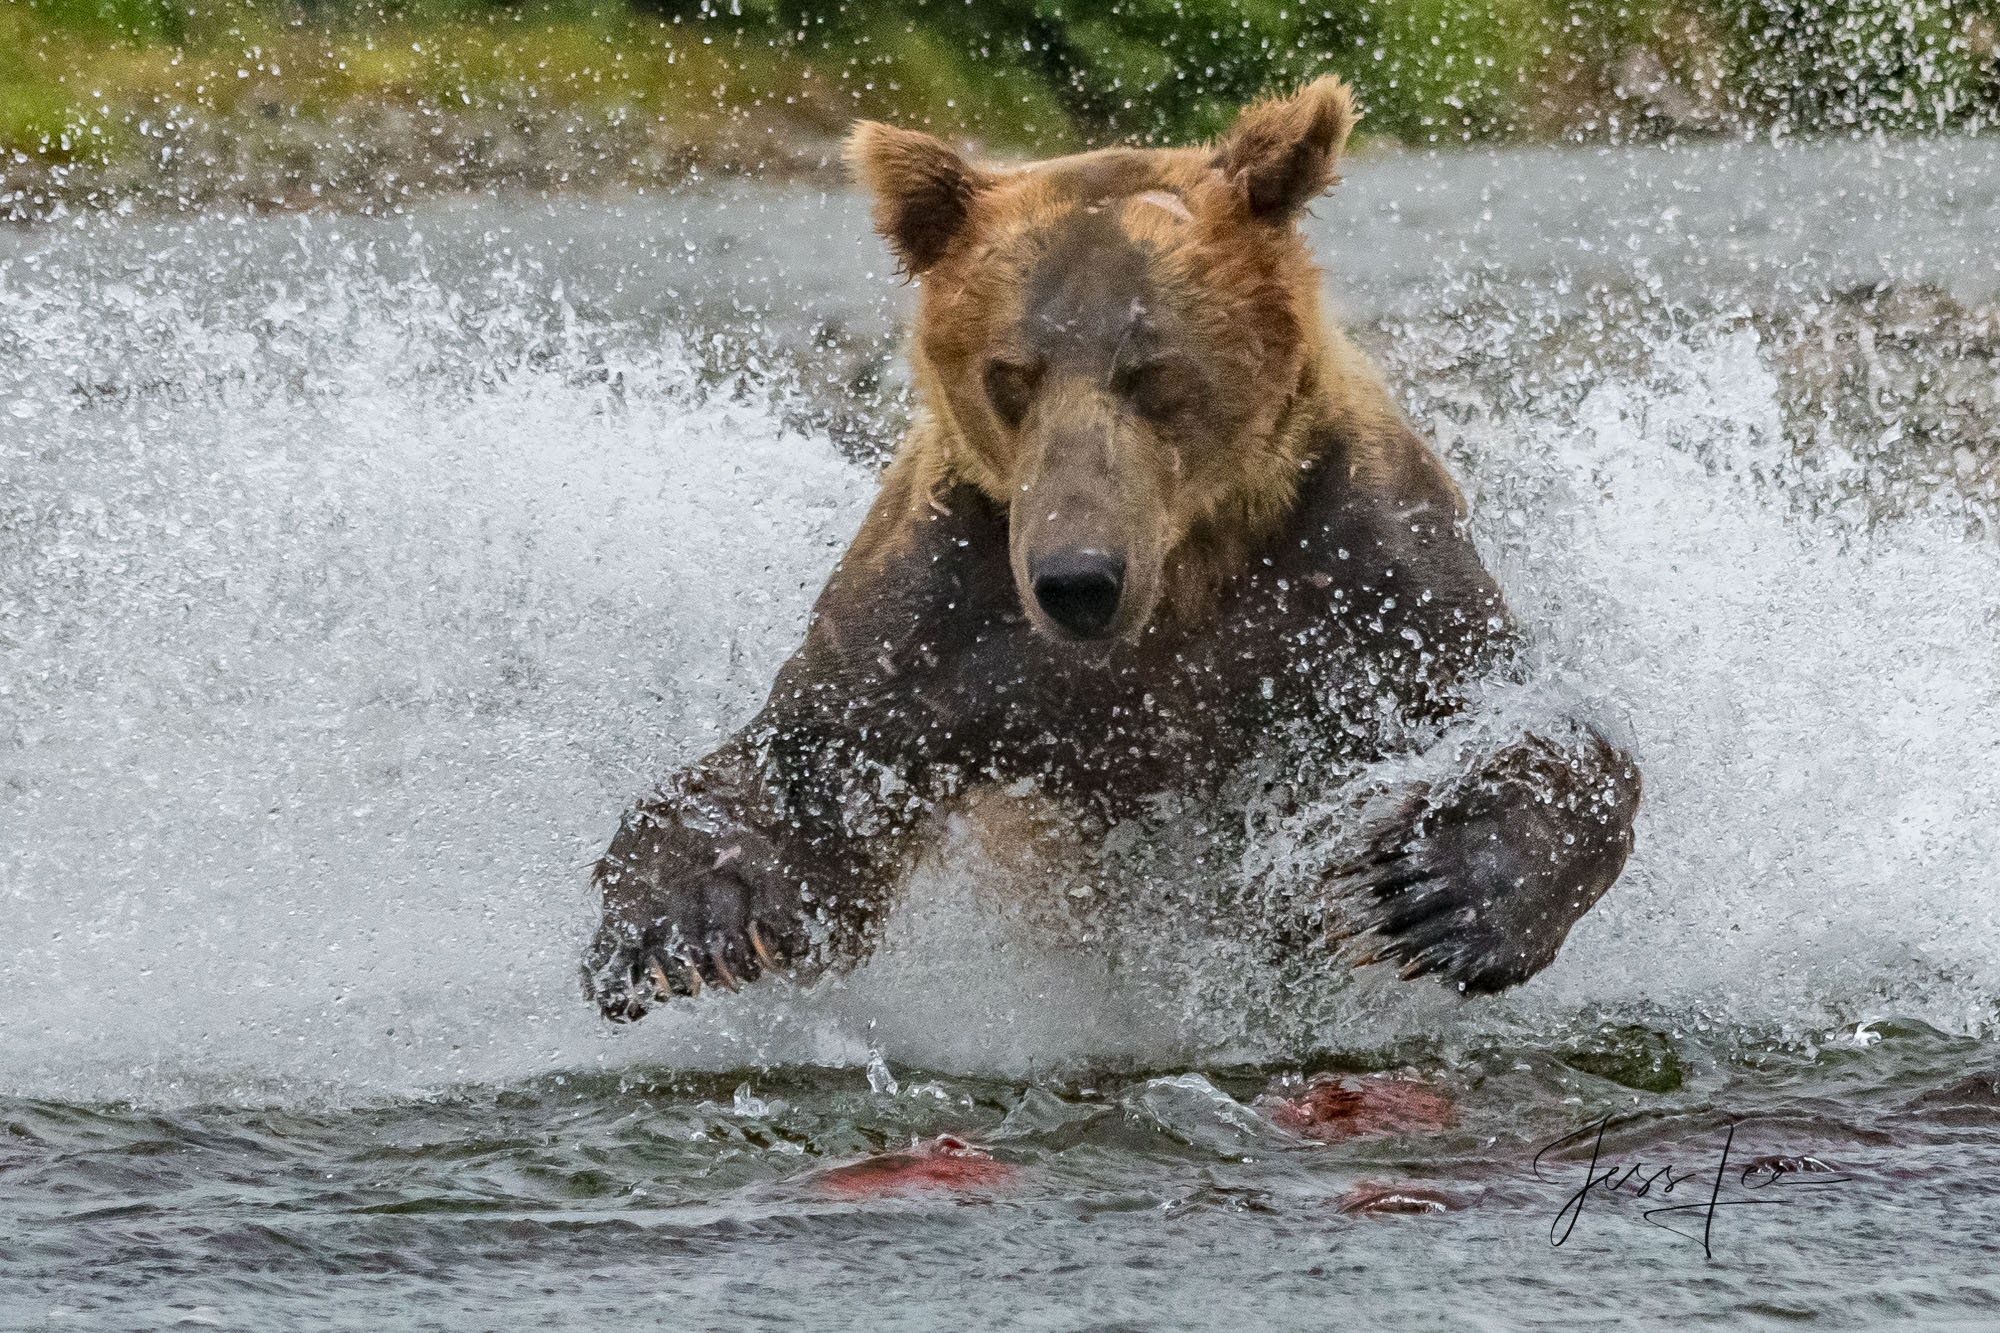 Grizzly bear fishing for salmon in Katmai National Park in Alaska Photo